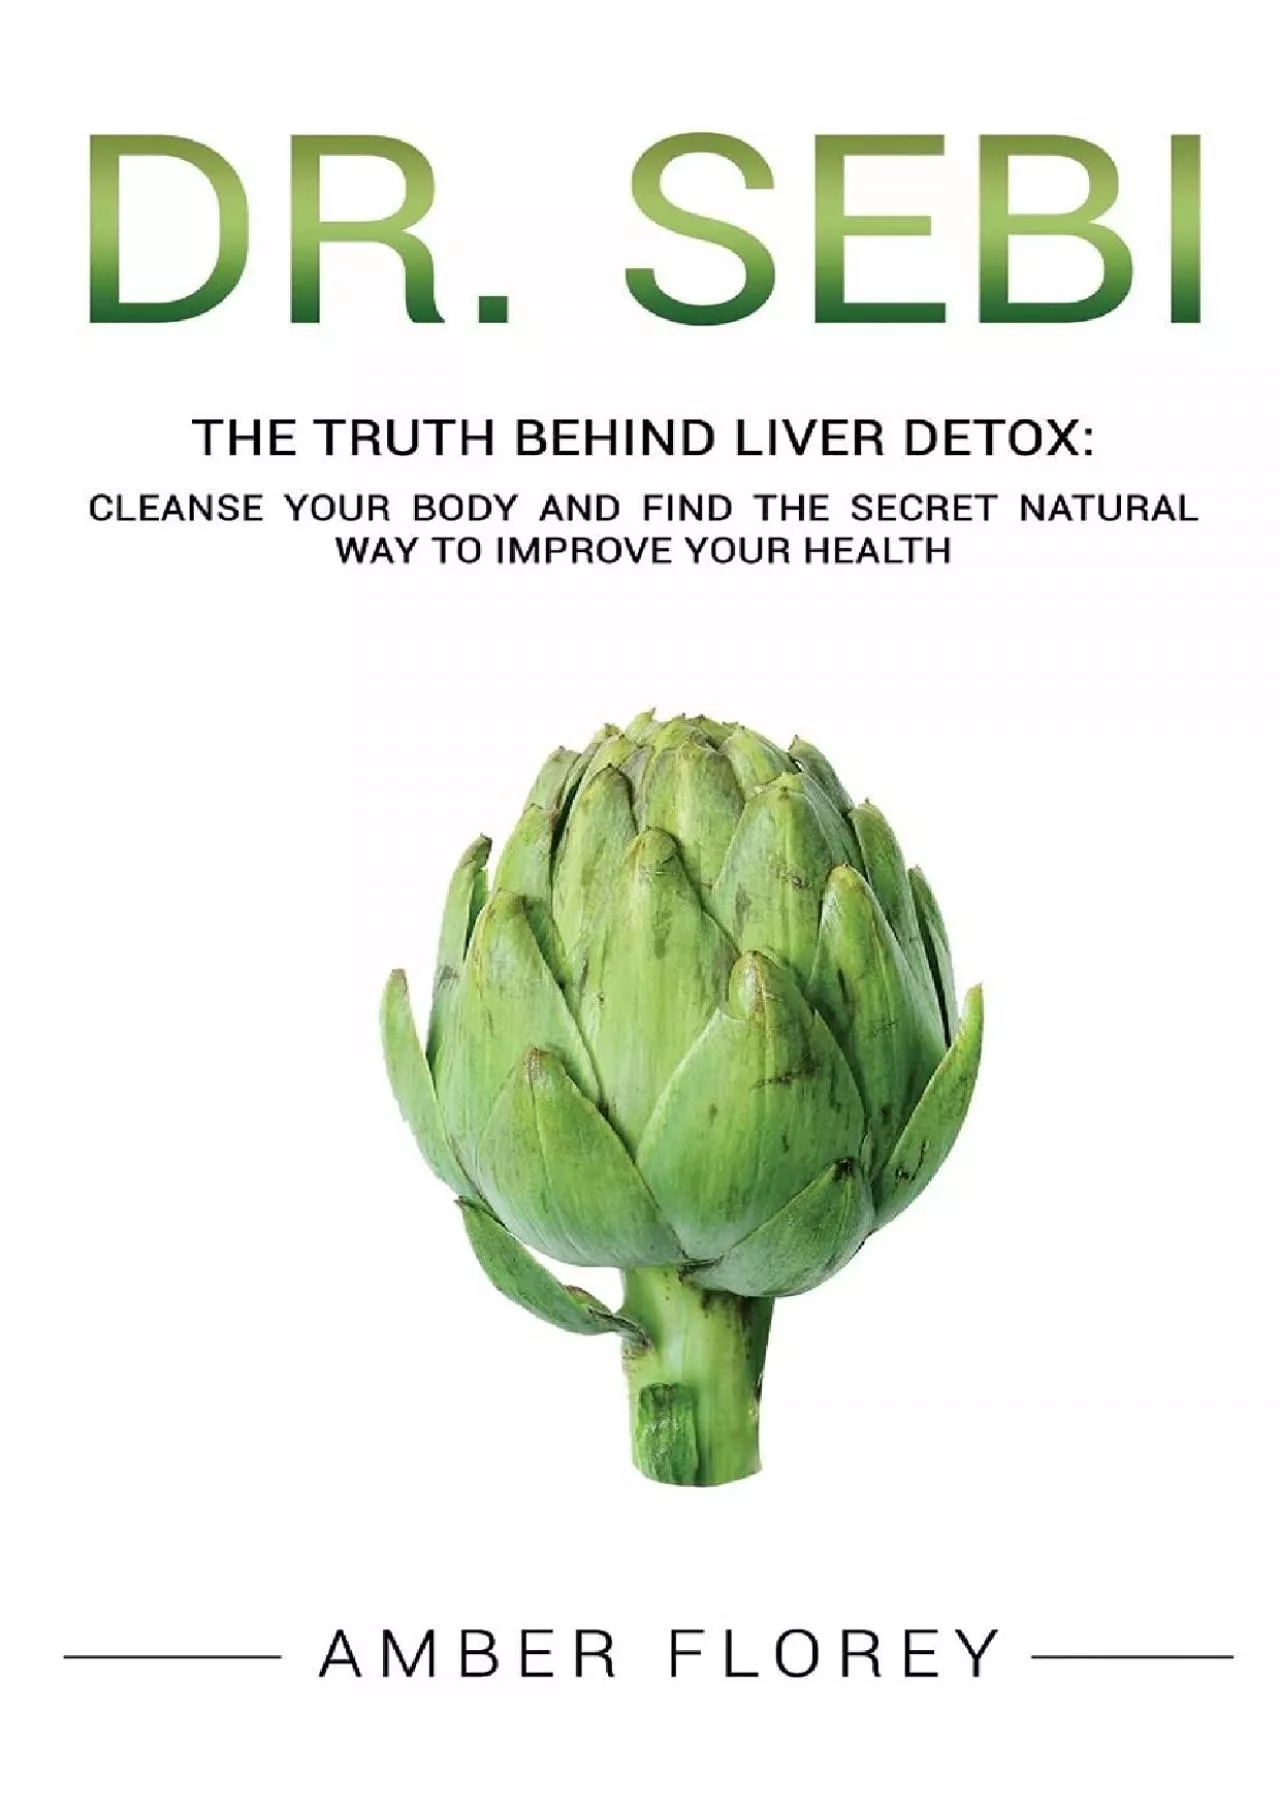 (DOWNLOAD)-Dr. Sebi: The Truth behind Liver Detox: Cleanse your body, find the Secret